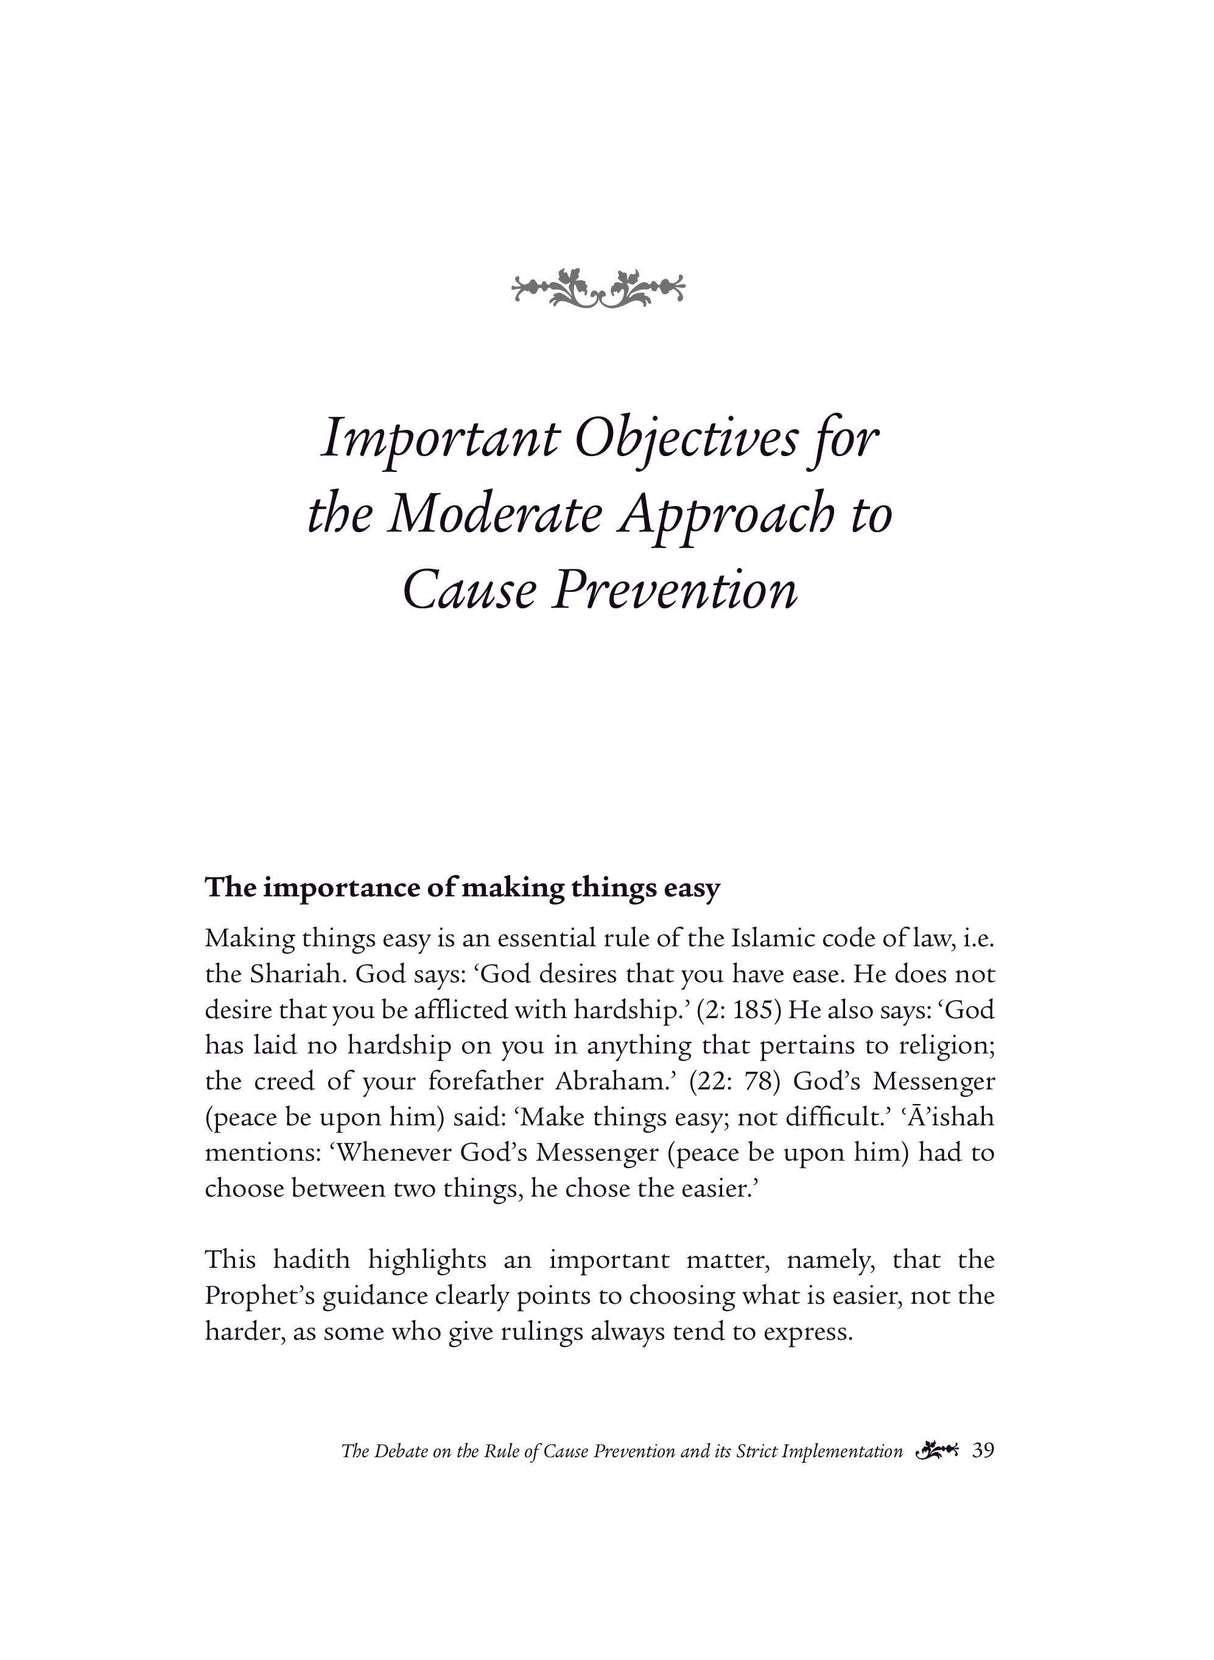 The Debate on the Rule of Cause Prevention and its Strict Implementation (Vol. 6)